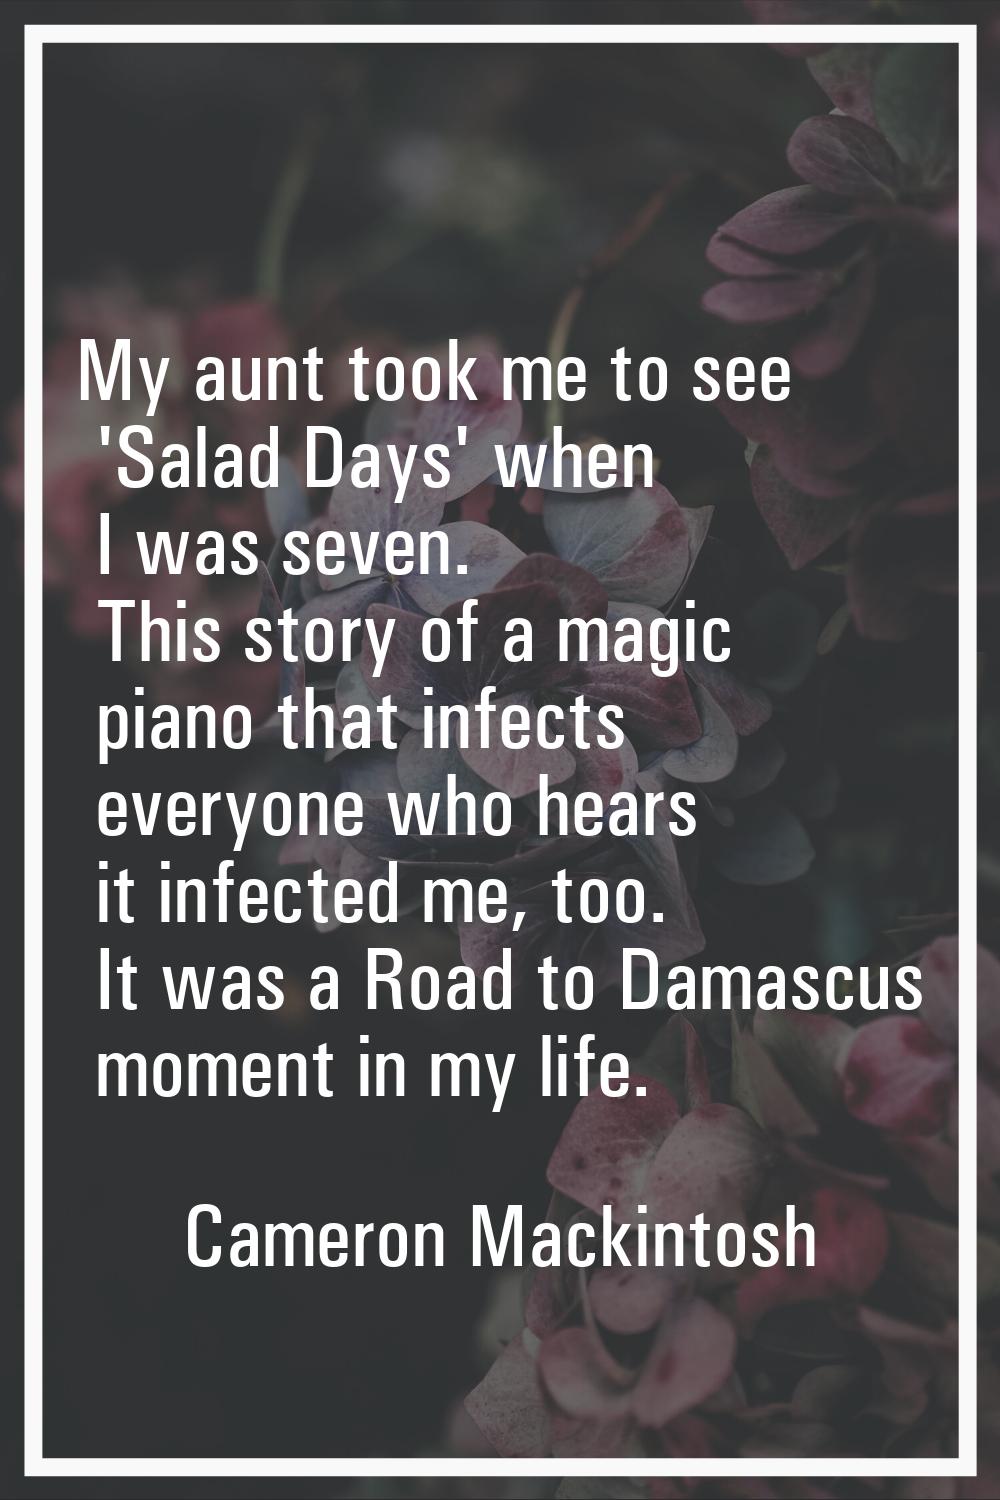 My aunt took me to see 'Salad Days' when I was seven. This story of a magic piano that infects ever